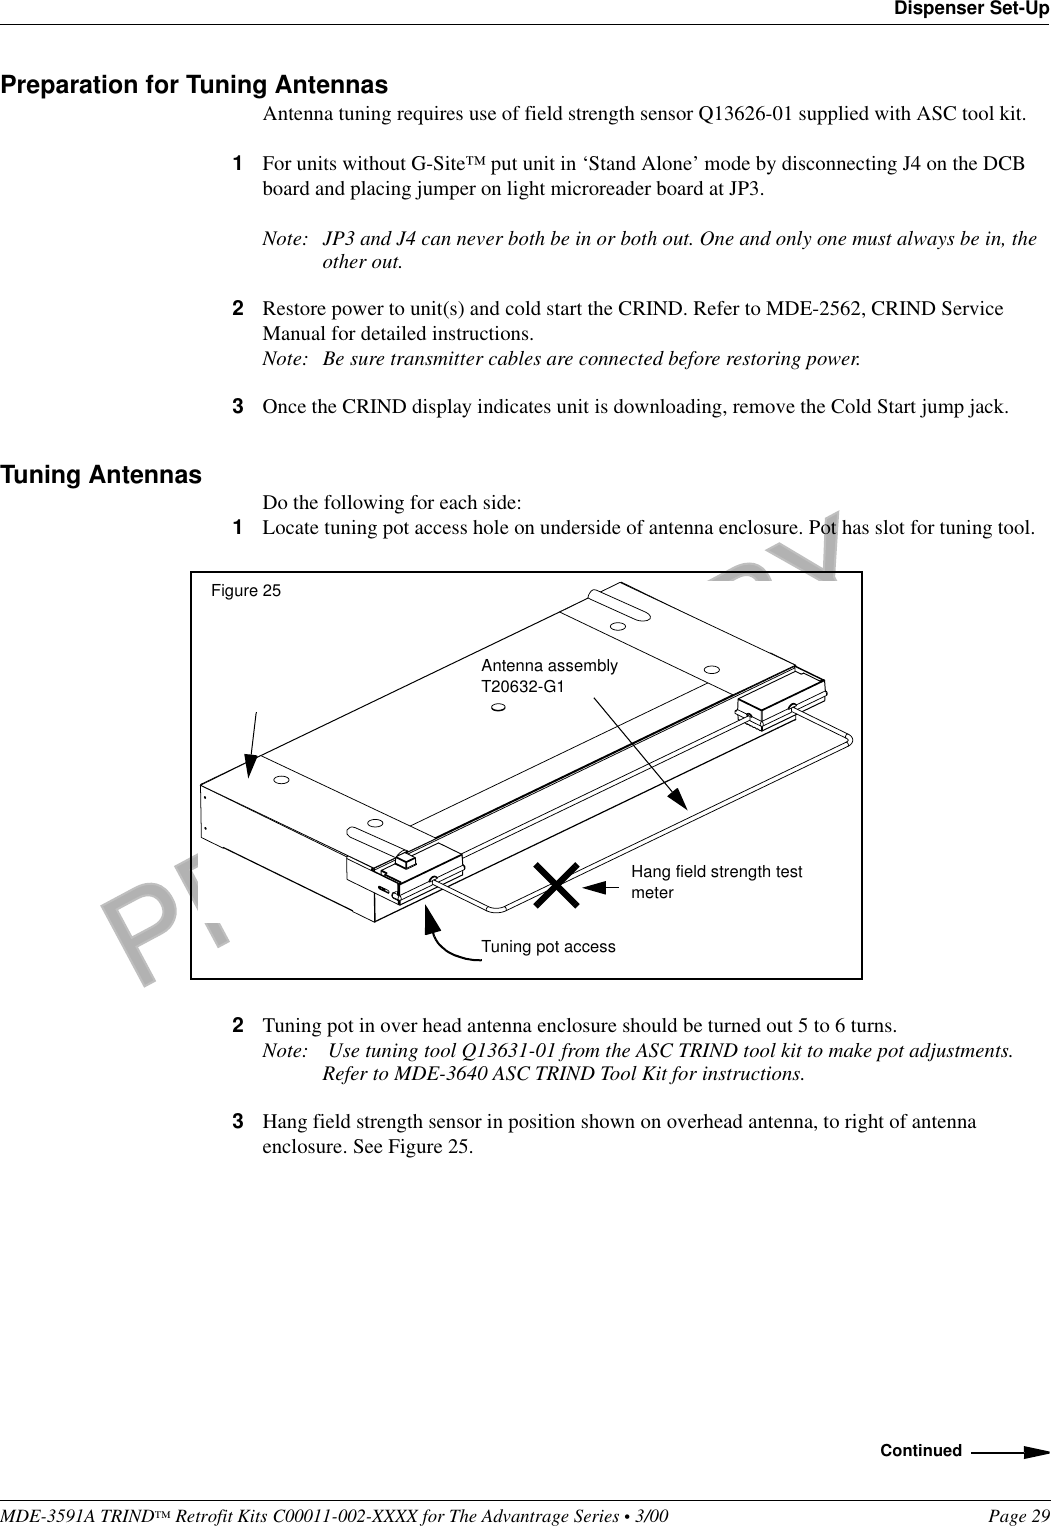 PRELIMINARYMDE-3591A TRIND™ Retrofit Kits C00011-002-XXXX for The Advantrage Series • 3/00  Page 29Dispenser Set-UpPreparation for Tuning AntennasAntenna tuning requires use of field strength sensor Q13626-01 supplied with ASC tool kit.1For units without G-Site™ put unit in ‘Stand Alone’ mode by disconnecting J4 on the DCB board and placing jumper on light microreader board at JP3.Note: JP3 and J4 can never both be in or both out. One and only one must always be in, the other out.2Restore power to unit(s) and cold start the CRIND. Refer to MDE-2562, CRIND Service Manual for detailed instructions.Note: Be sure transmitter cables are connected before restoring power.3Once the CRIND display indicates unit is downloading, remove the Cold Start jump jack.Tuning Antennas Do the following for each side:1Locate tuning pot access hole on underside of antenna enclosure. Pot has slot for tuning tool.2Tuning pot in over head antenna enclosure should be turned out 5 to 6 turns. Note:  Use tuning tool Q13631-01 from the ASC TRIND tool kit to make pot adjustments. Refer to MDE-3640 ASC TRIND Tool Kit for instructions.3Hang field strength sensor in position shown on overhead antenna, to right of antenna enclosure. See Figure 25.Antenna assembly T20632-G1Figure 25Tuning pot accessHang field strength test meterContinued